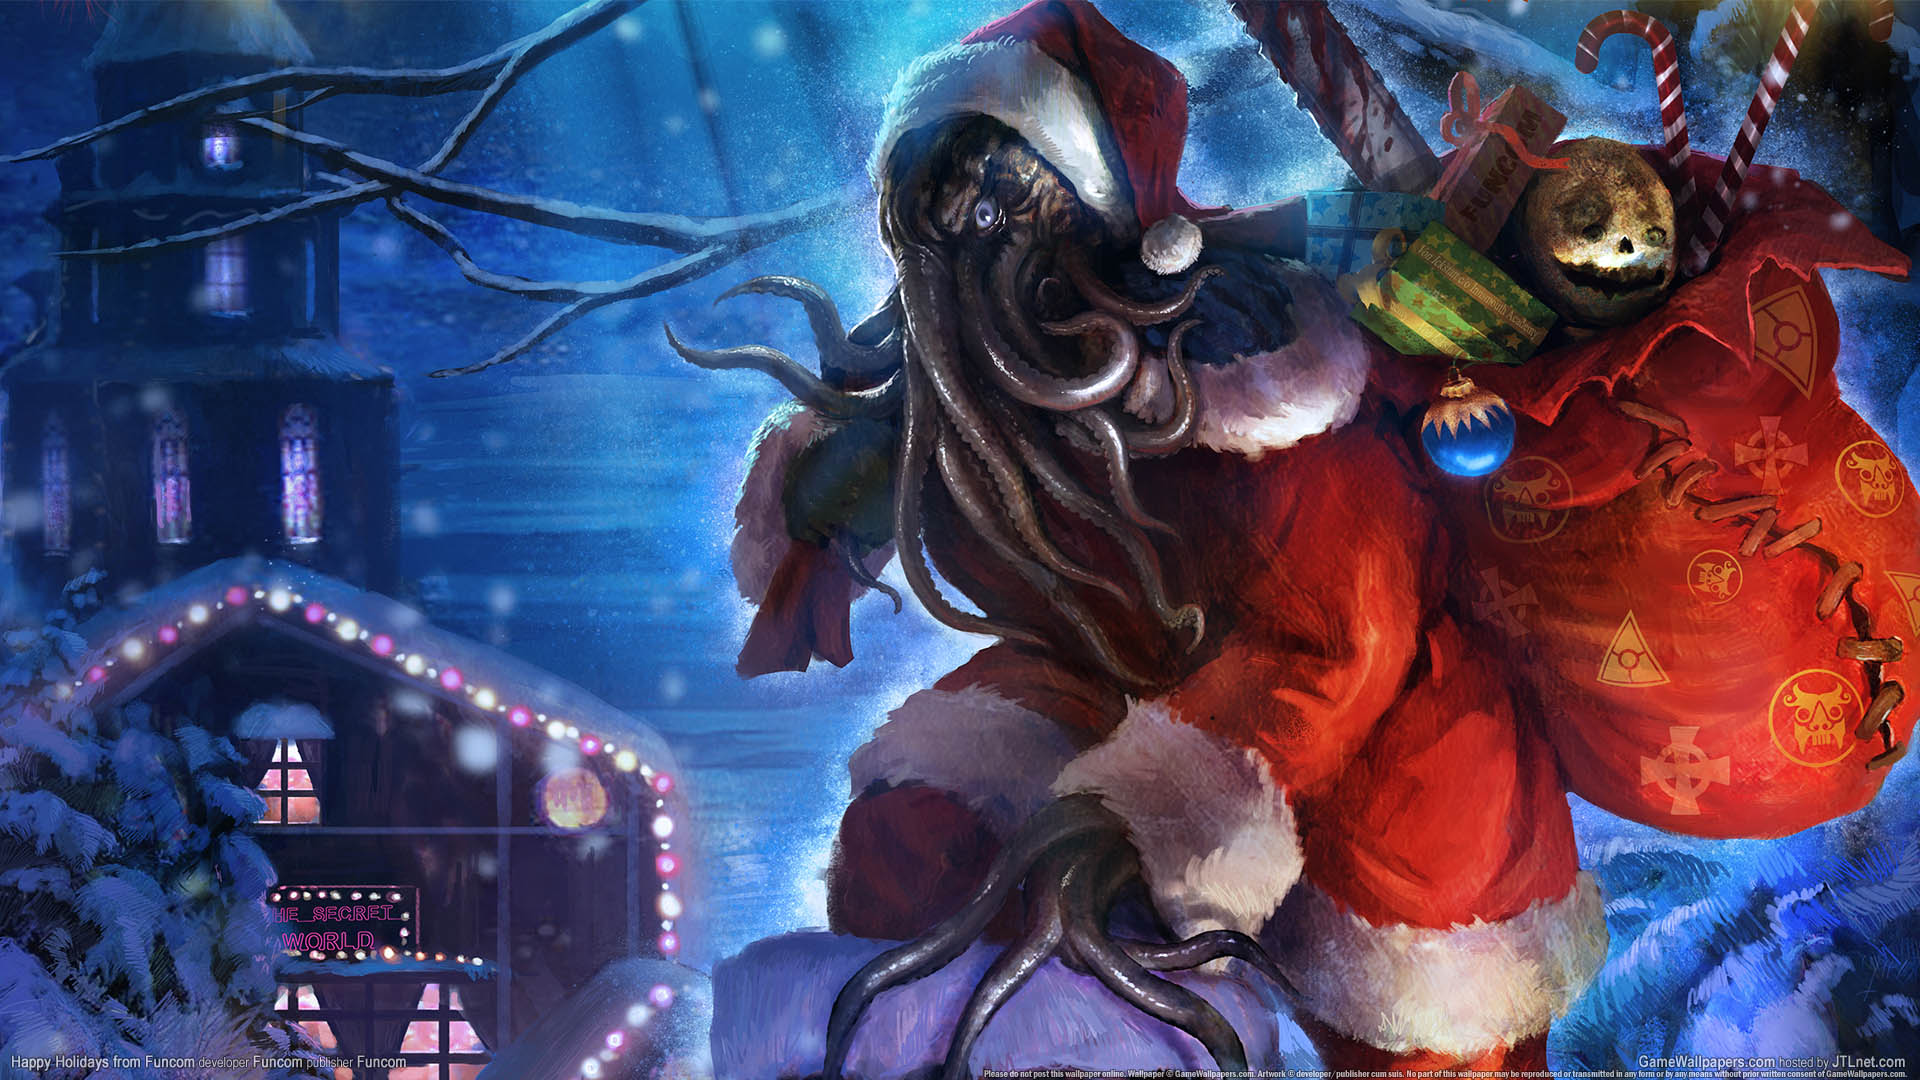 Happy Holidays from Funcom achtergrond 01 1920x1080